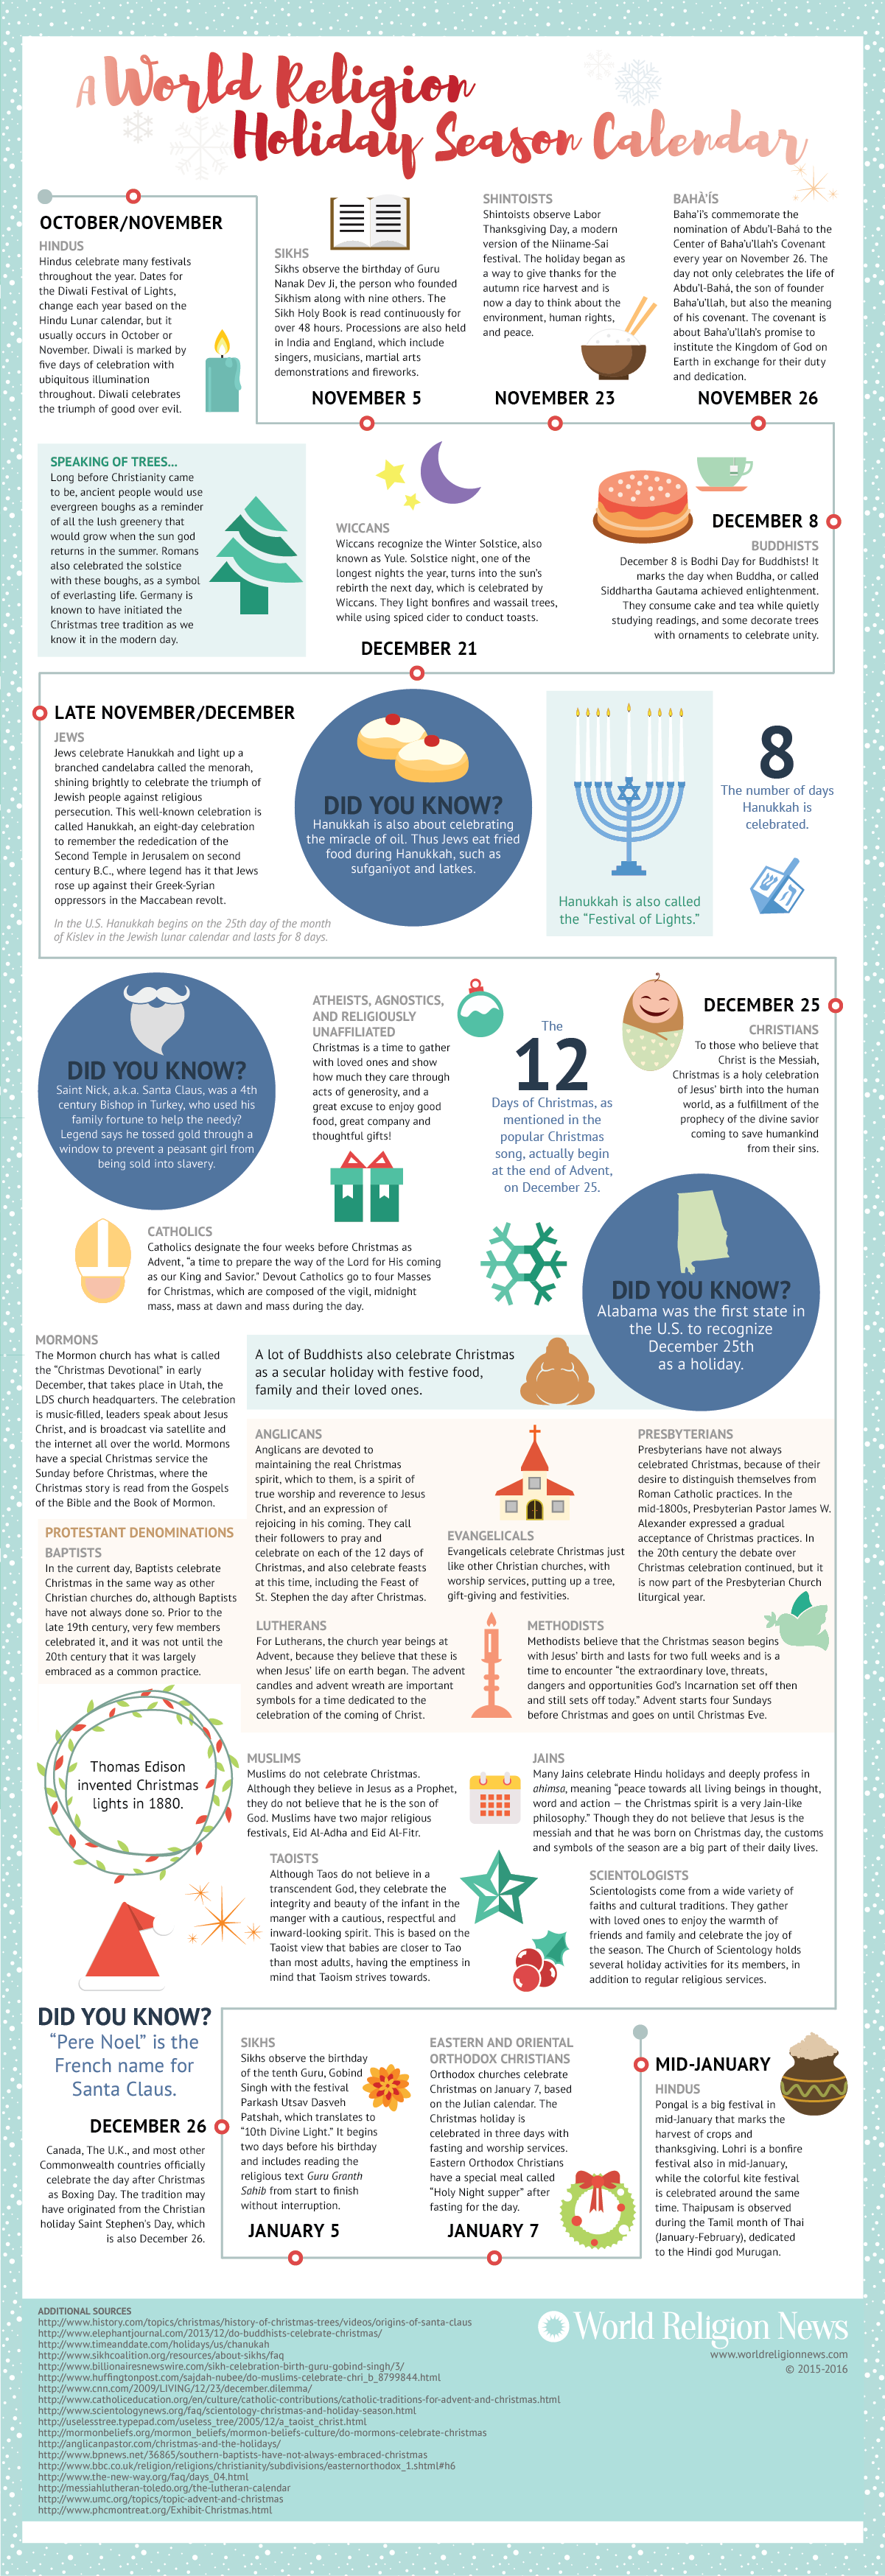 What Do World Religions Do During the Holiday Season? [Infographic]